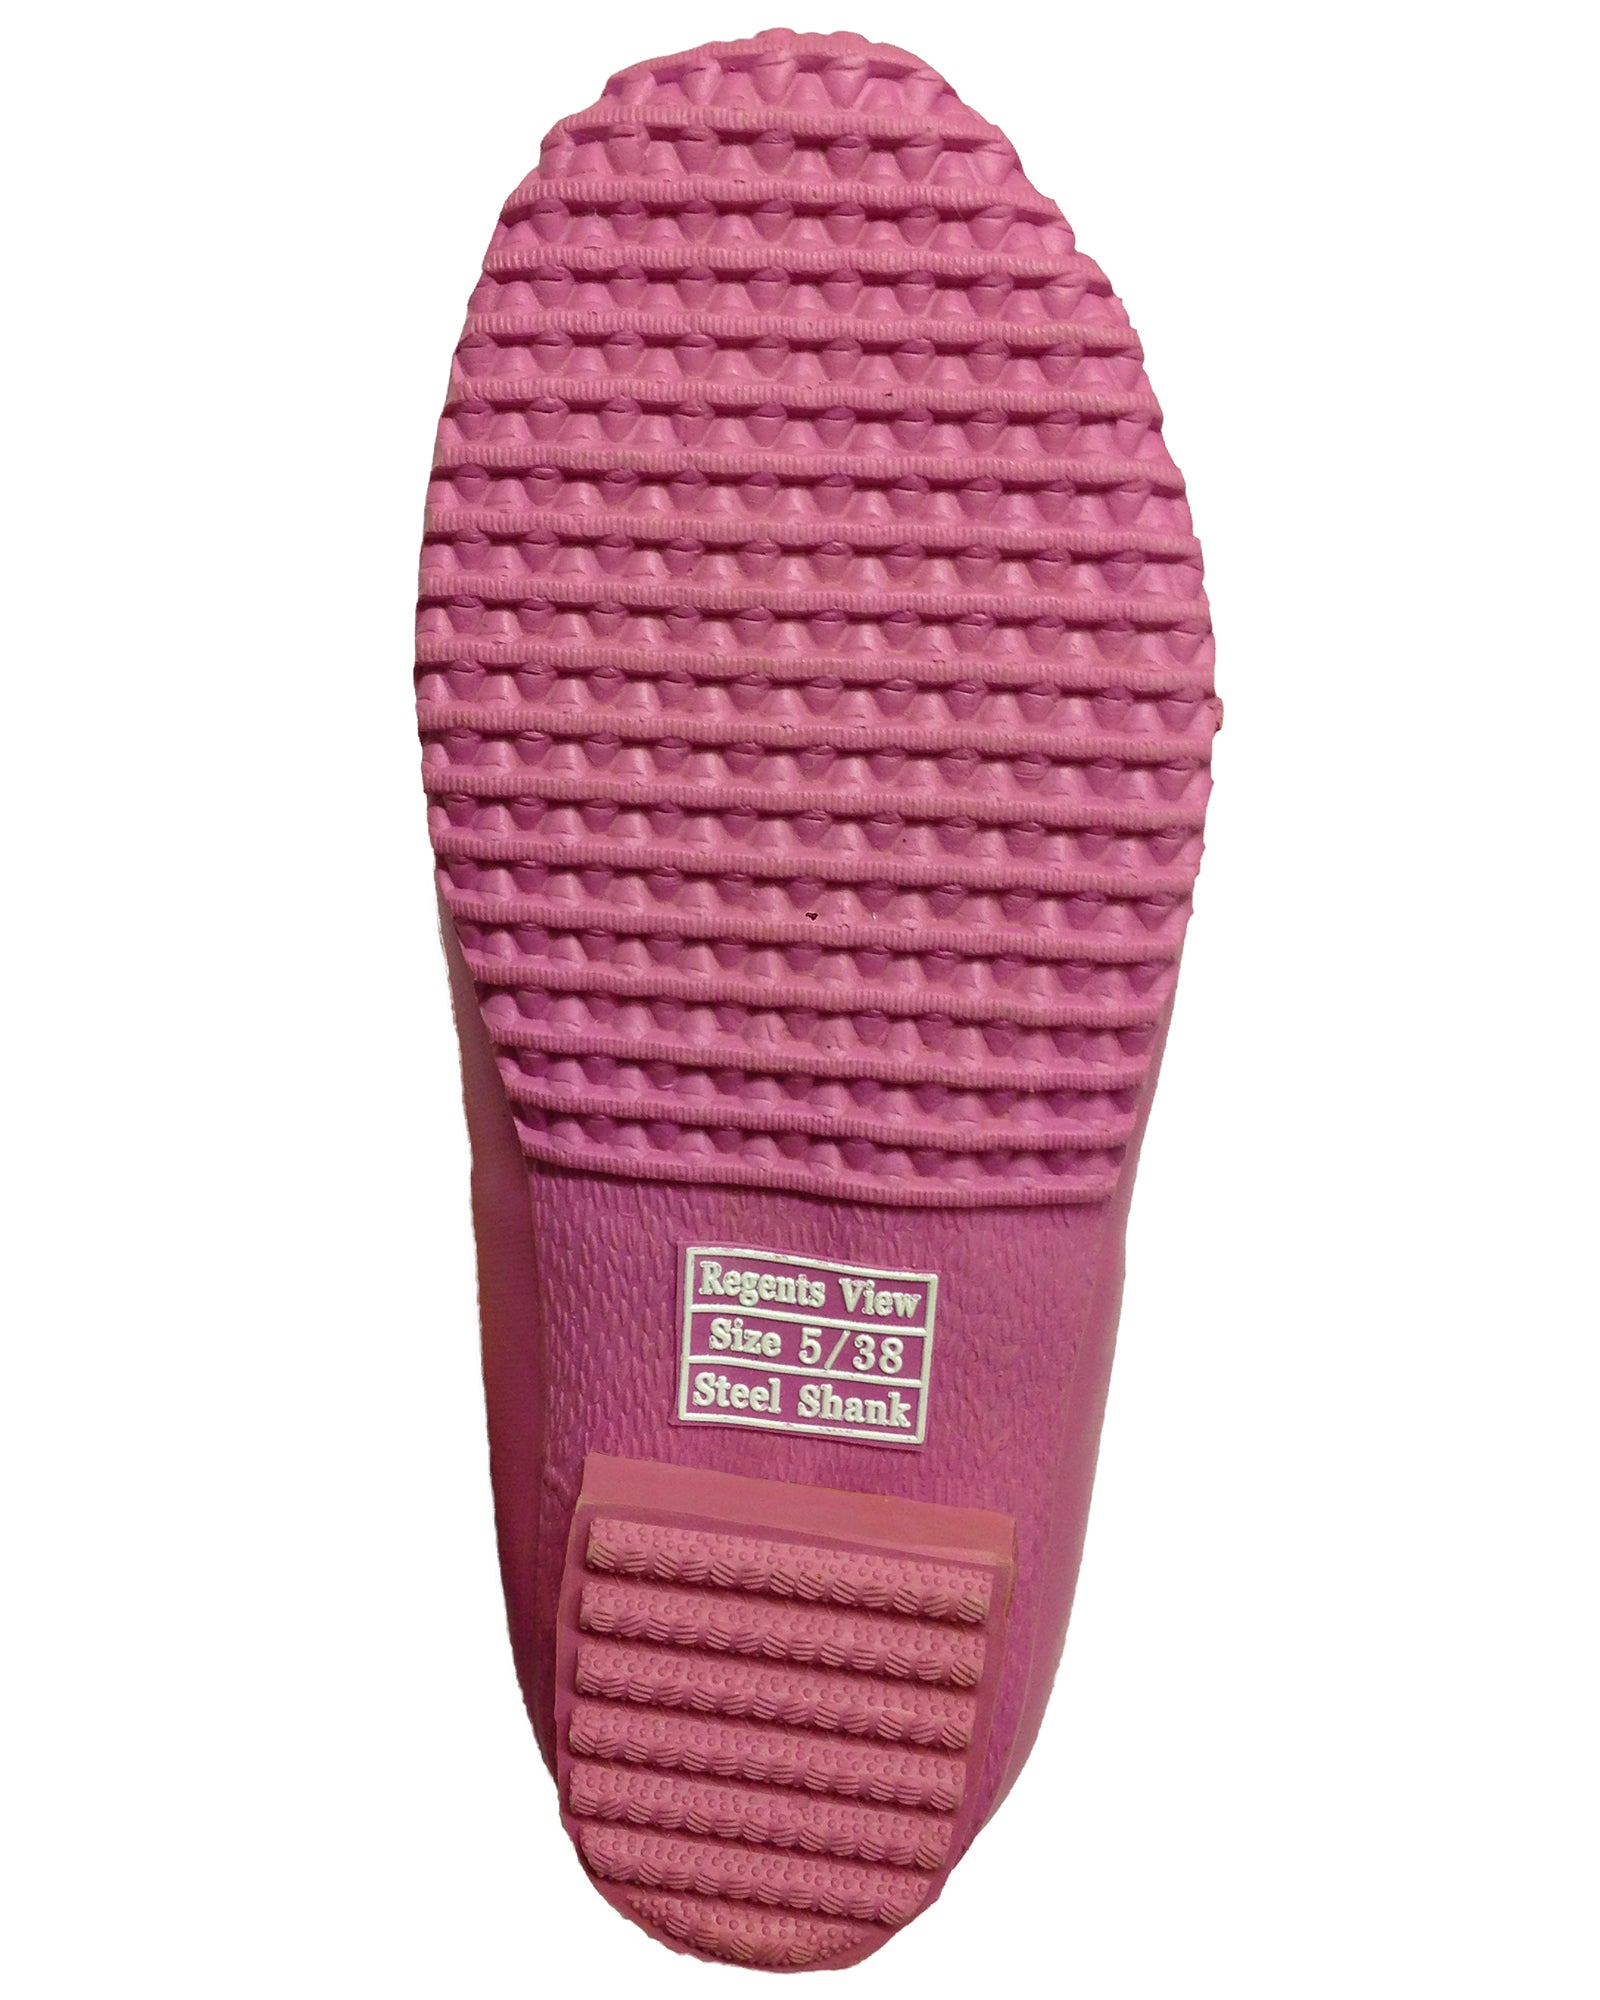 Regents View Ladies Equestrian Walking Stable Boots - Pink